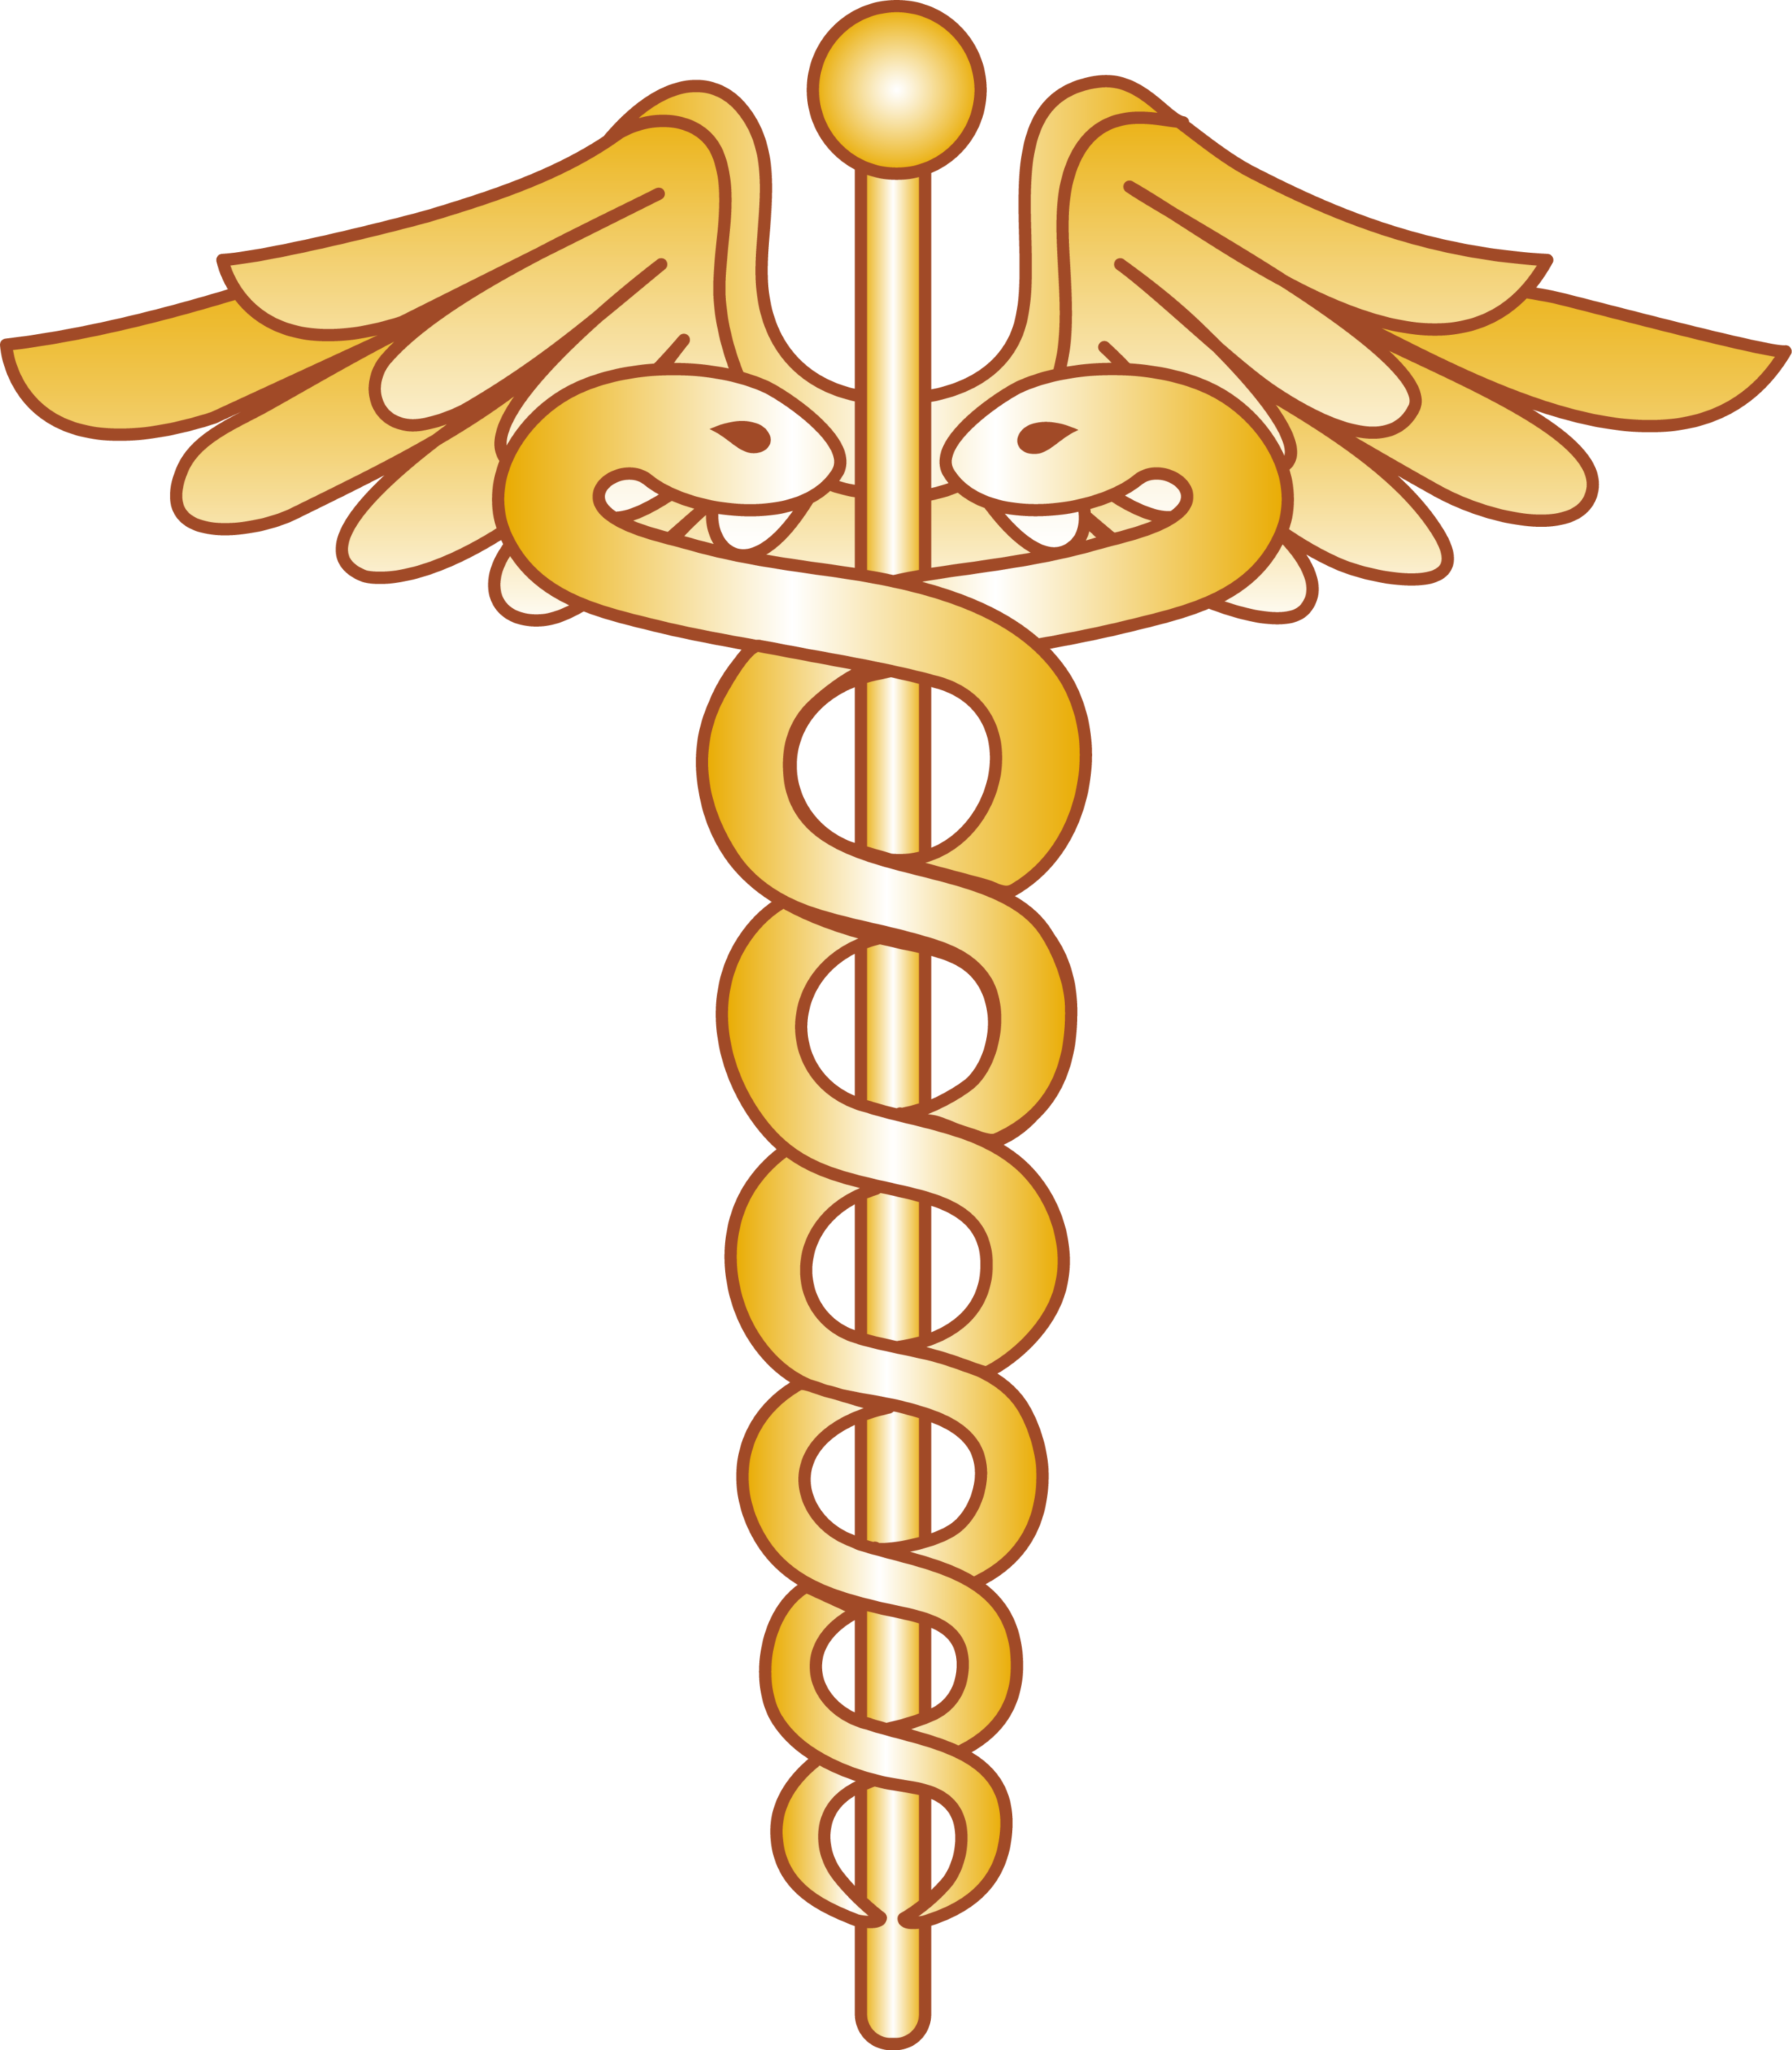 free clipart images healthcare - photo #22